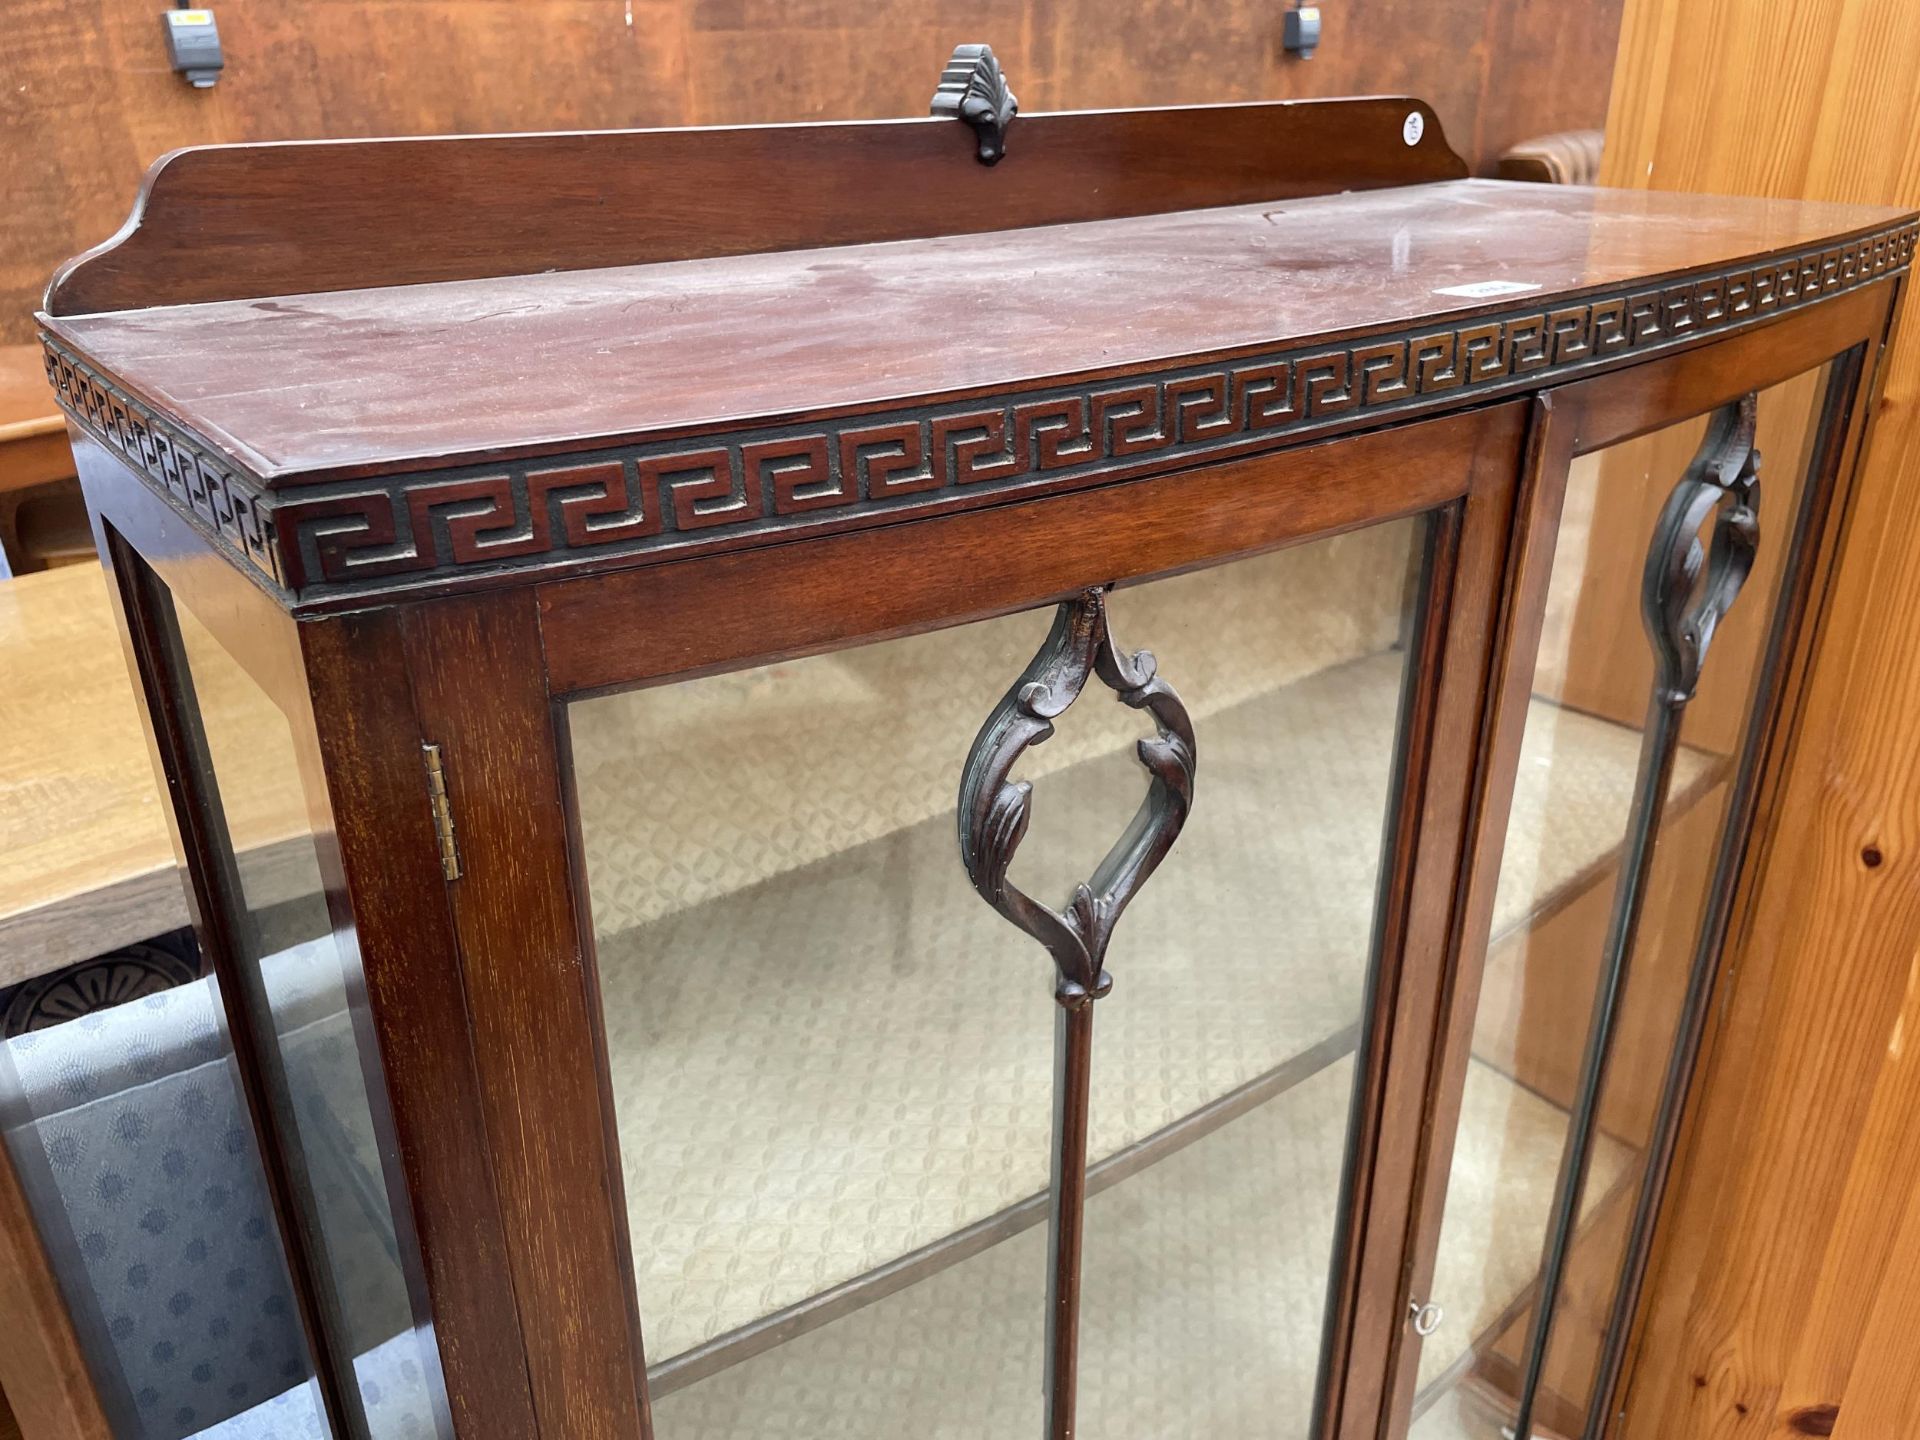 AN EARLY 20TH CENTURY MAHOGANY TWO DOOR GLASS DISPLAY CABINET WITH GREEK KEY CARVING, ON CABRIOLE - Image 3 of 4